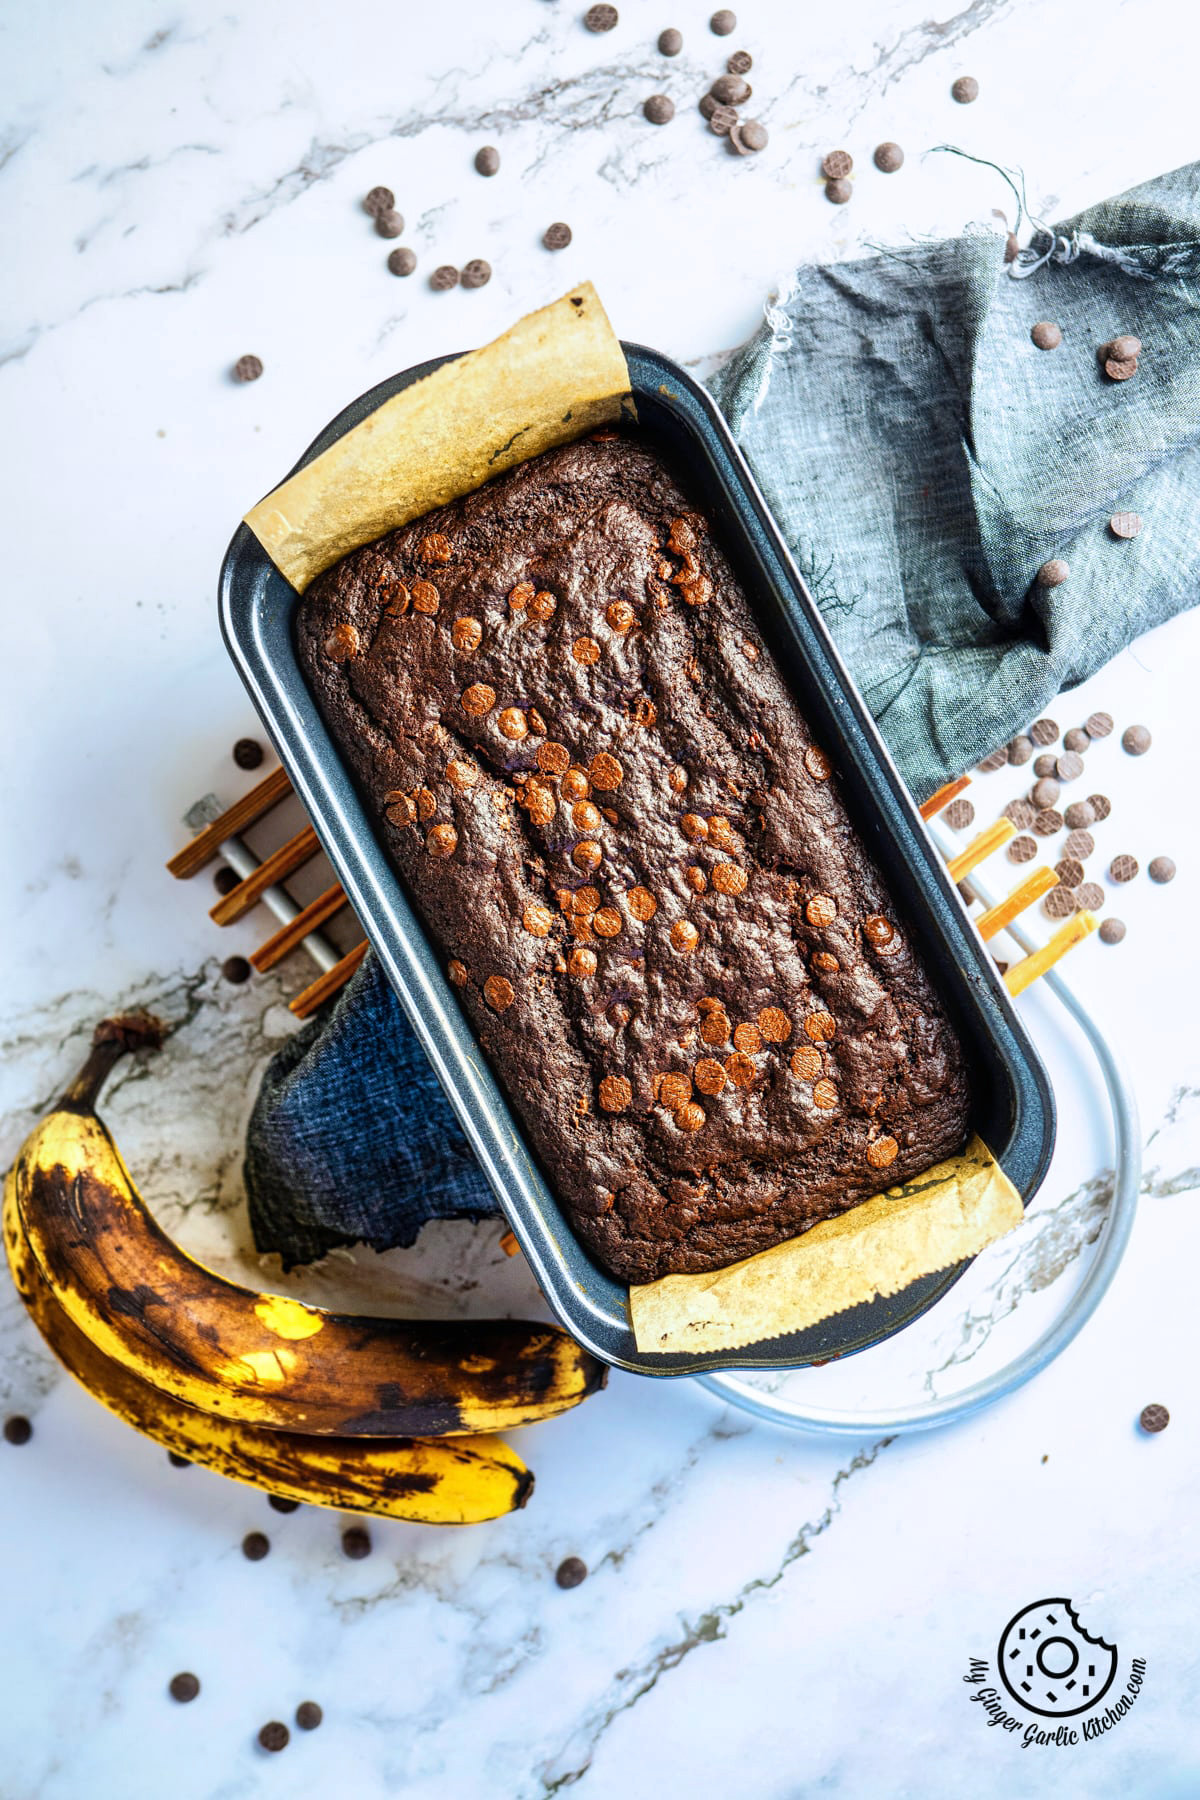 chocolate banana bread in a loaf pan and two ripe bananas on the side